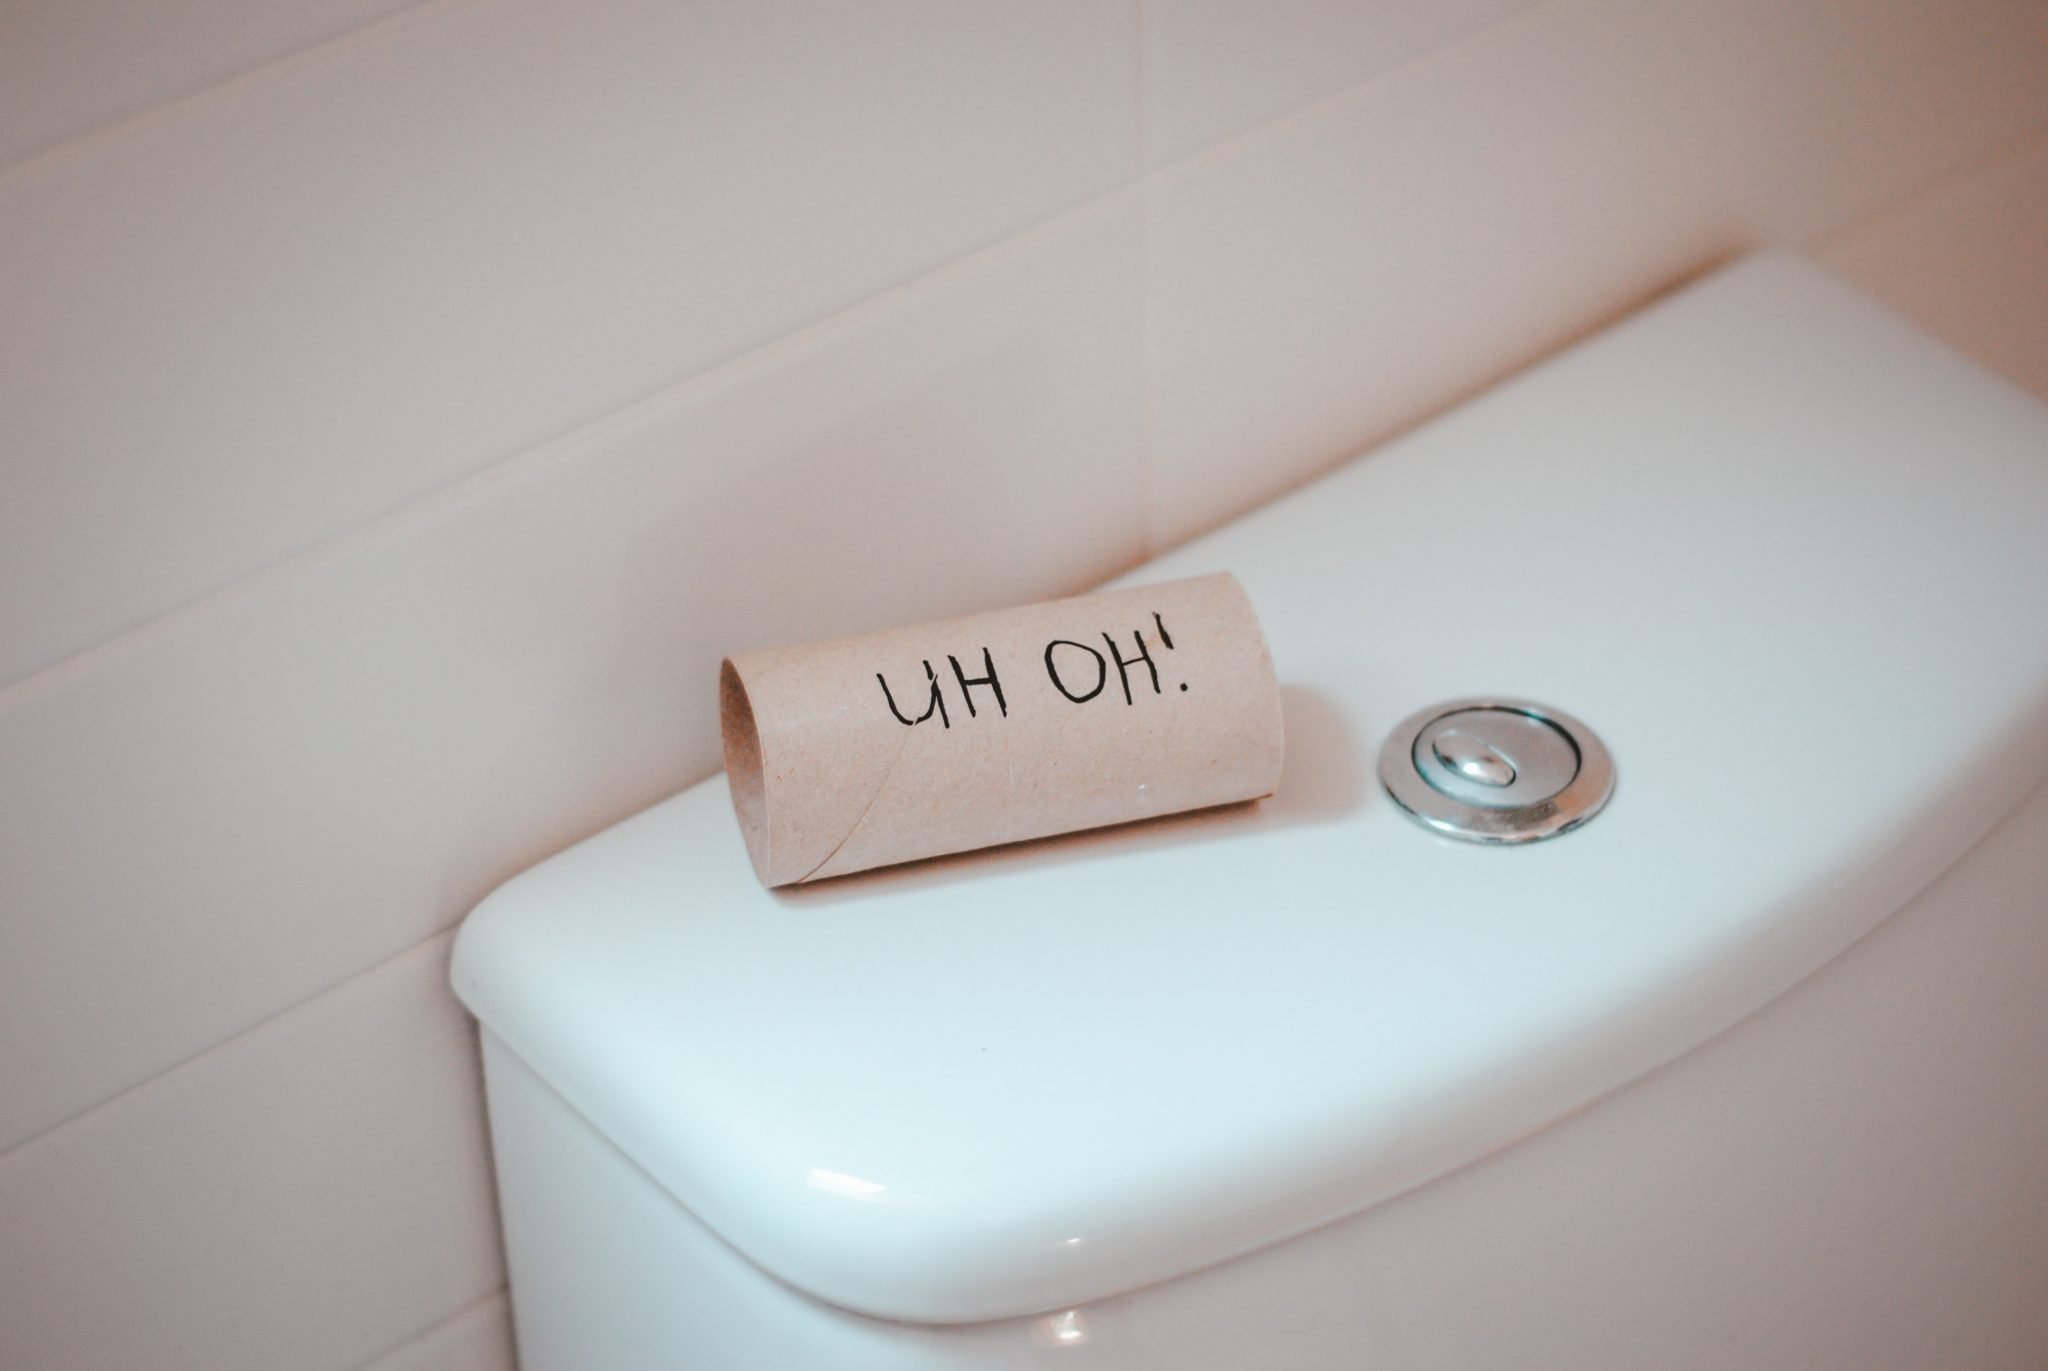 How Dirty Is Toilet Water? - Ideal Home Advice